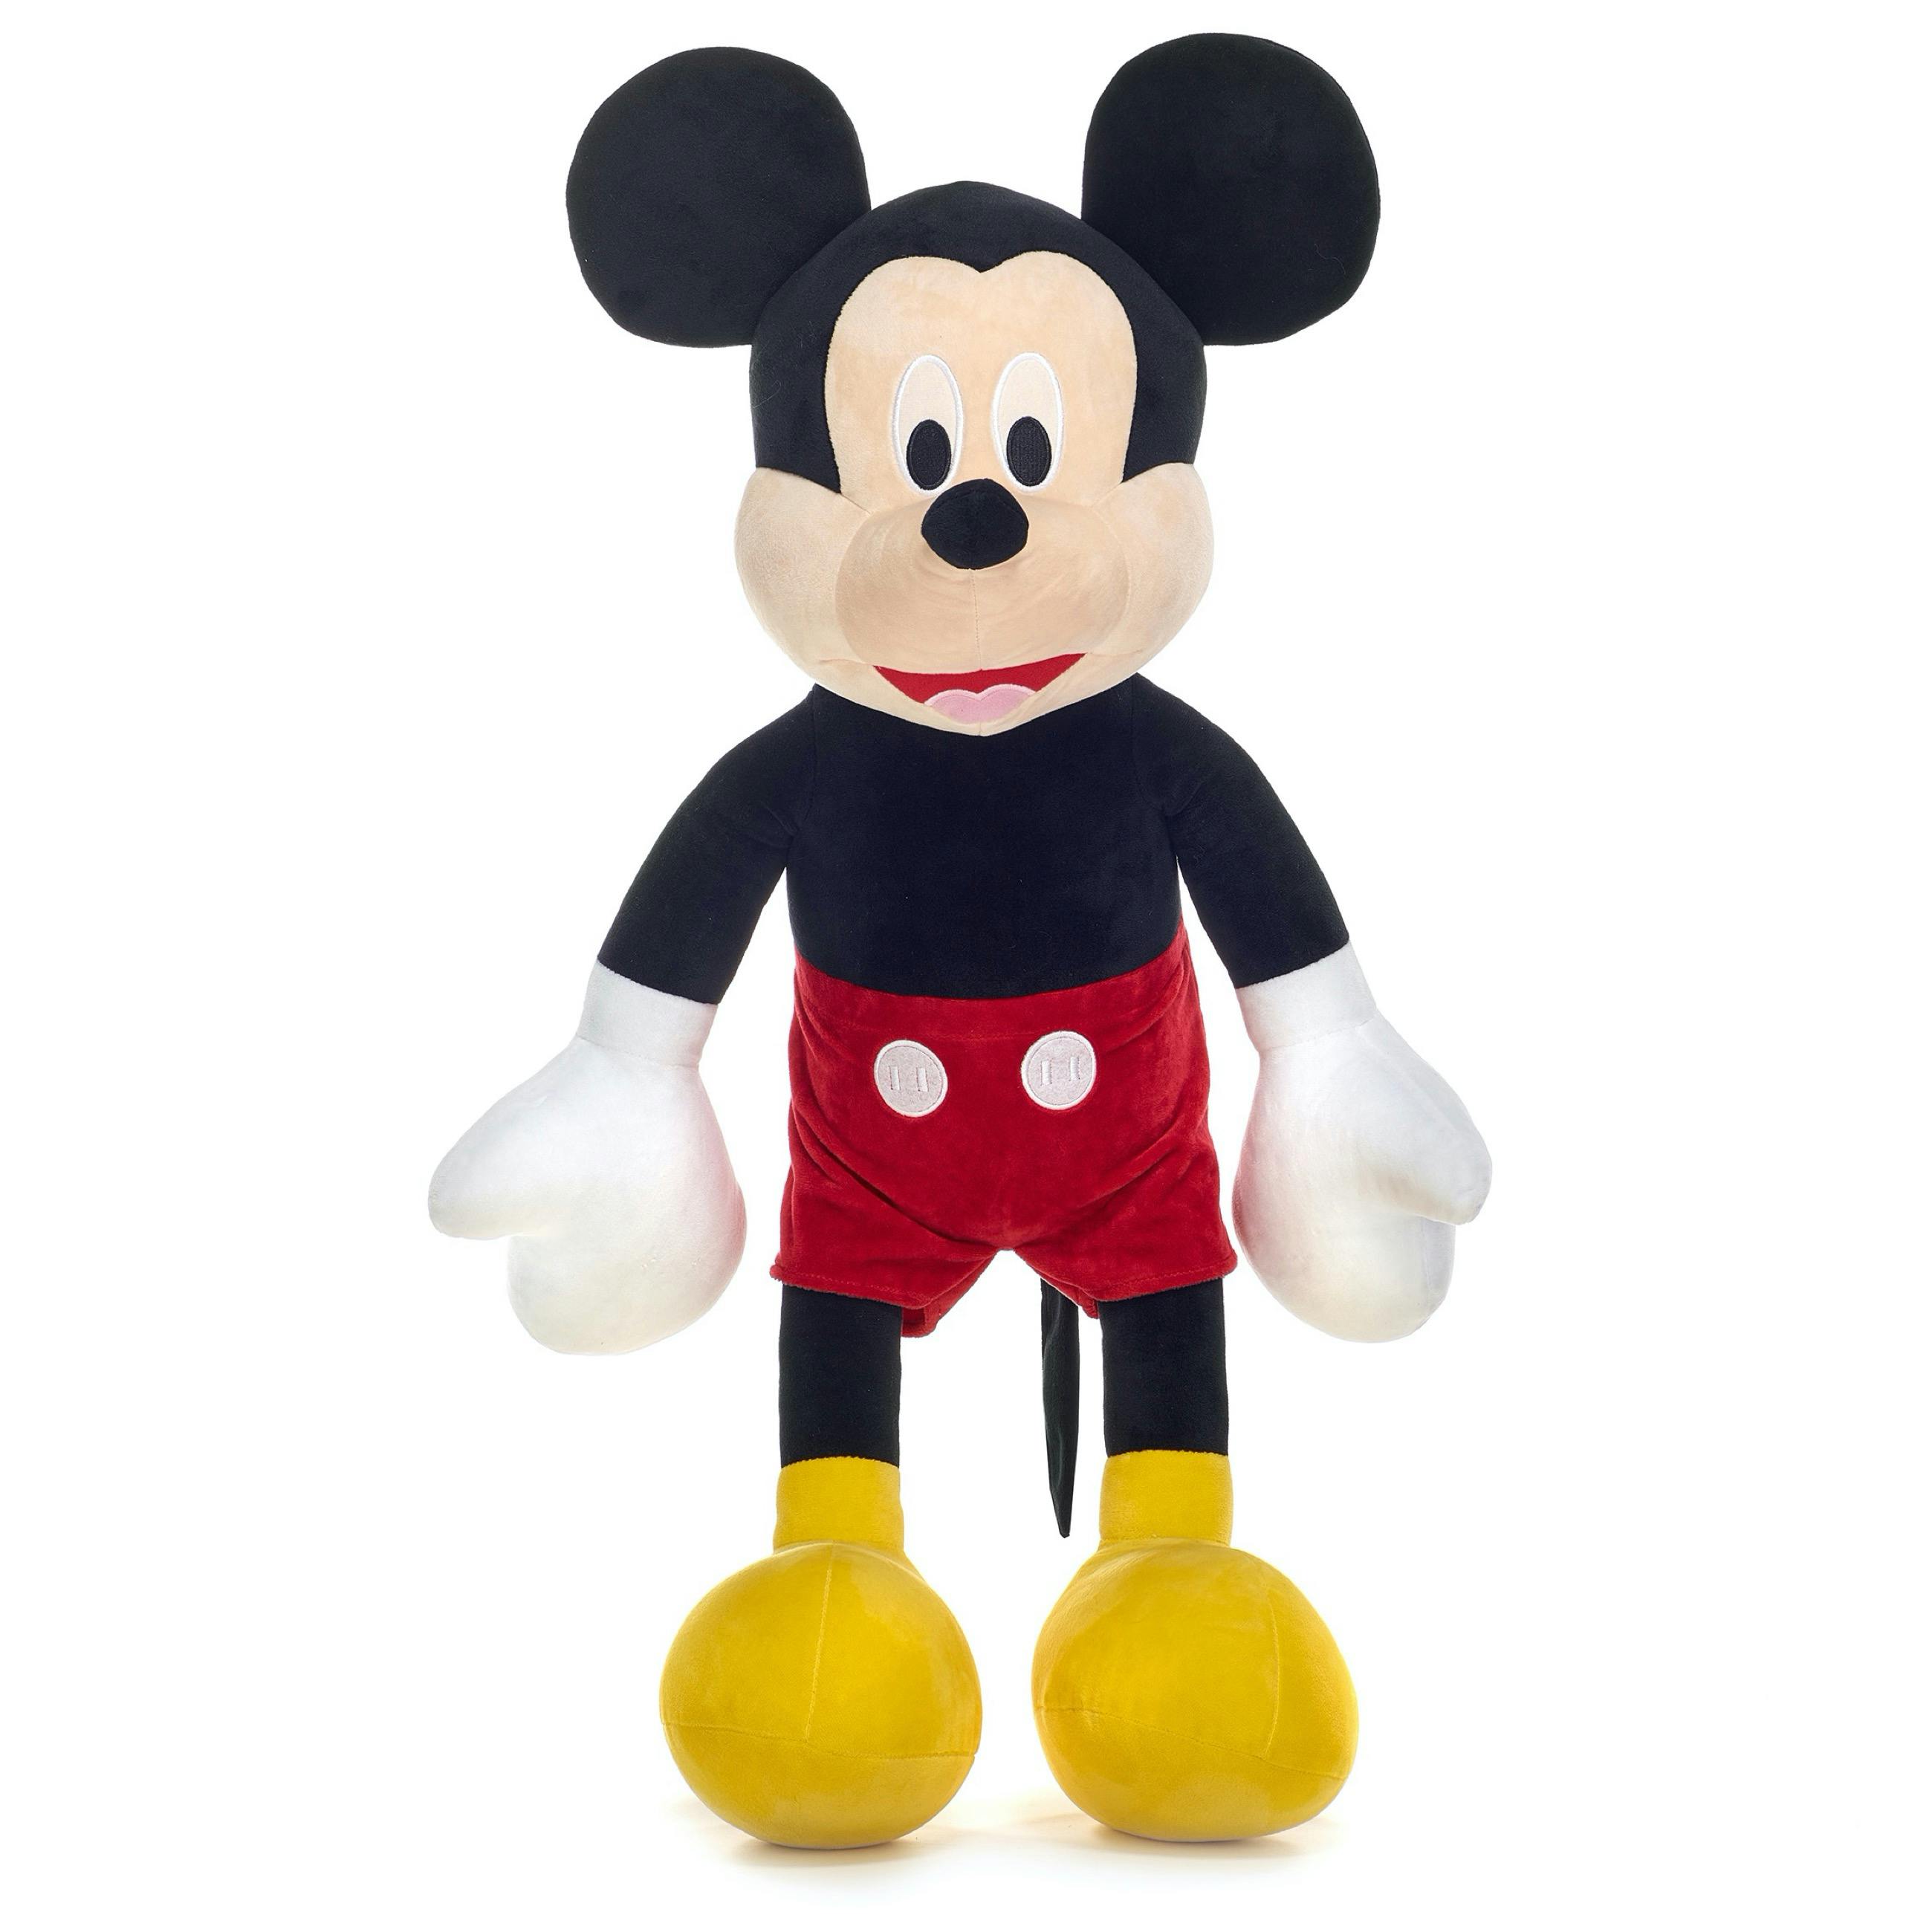 Product - Giant Mickey Mouse 